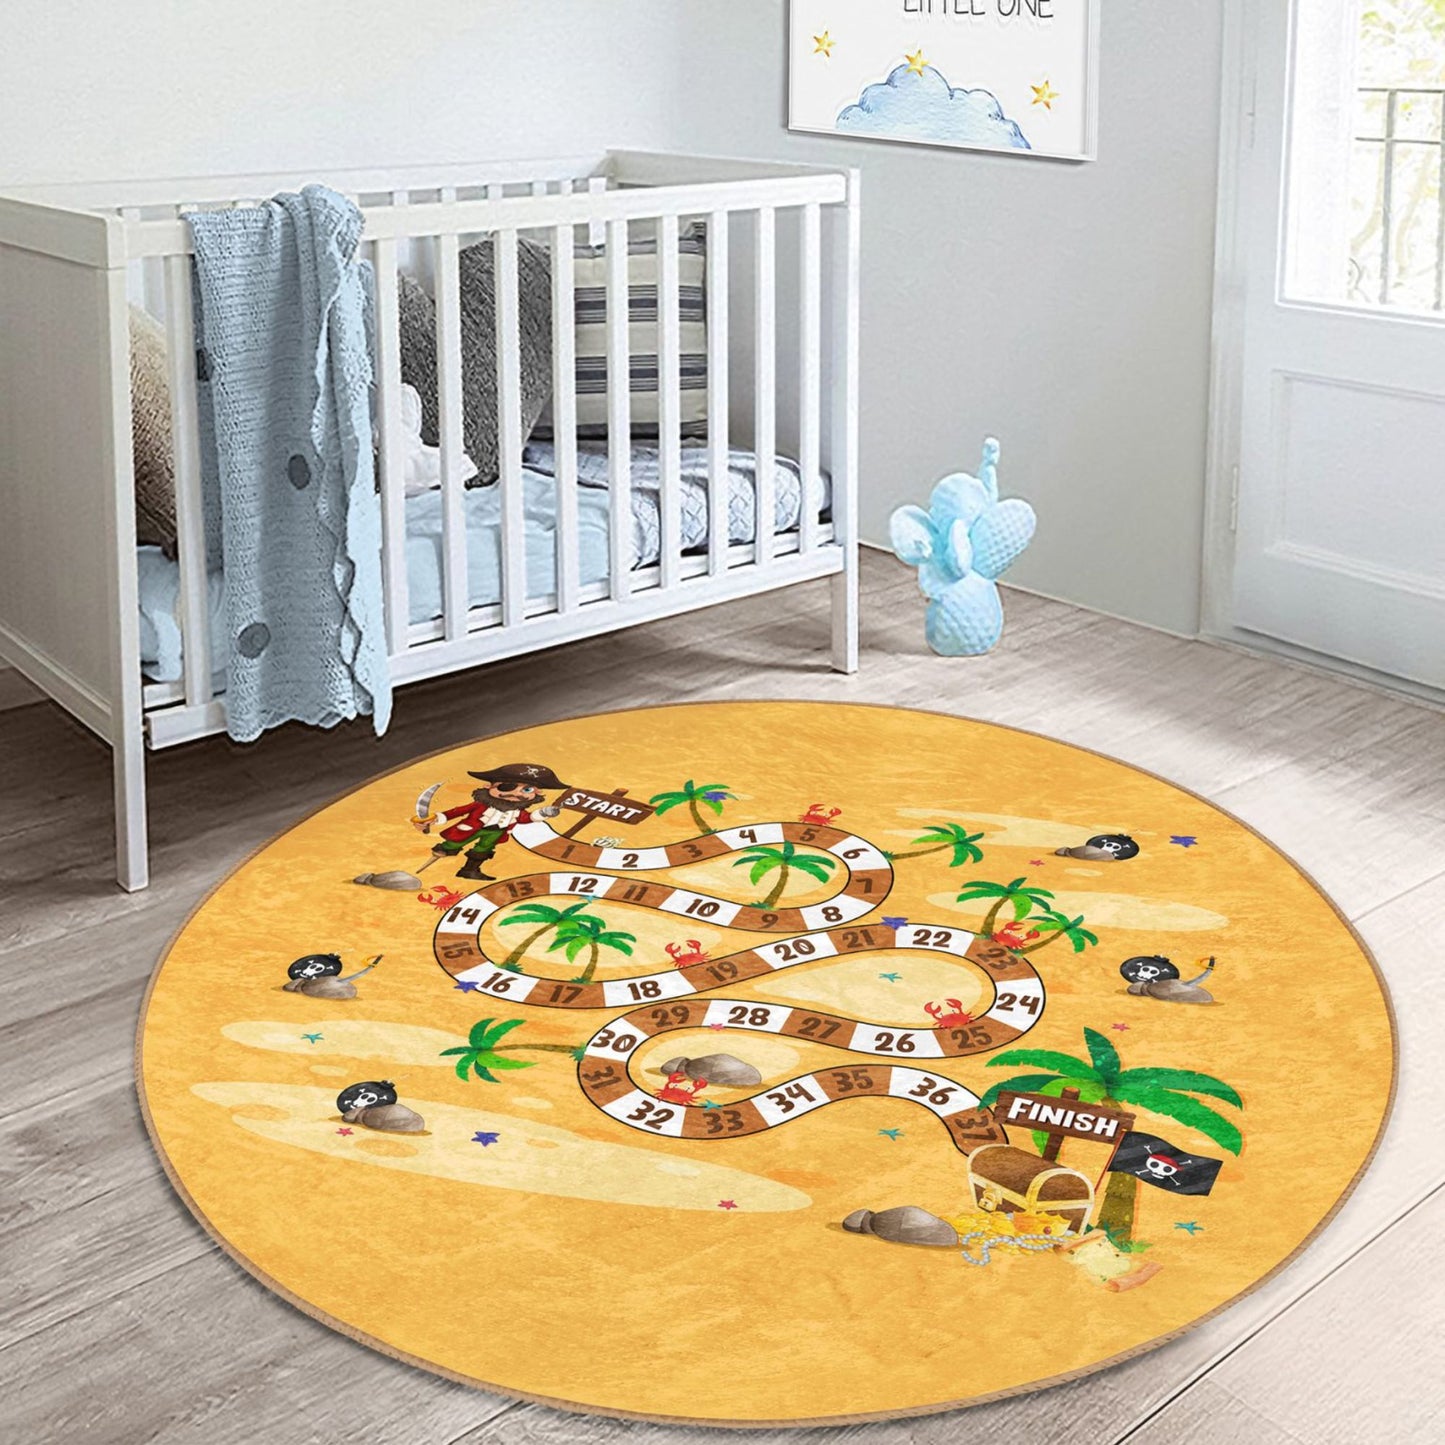 Rug with Pirate Adventure Theme for Kids Play Area